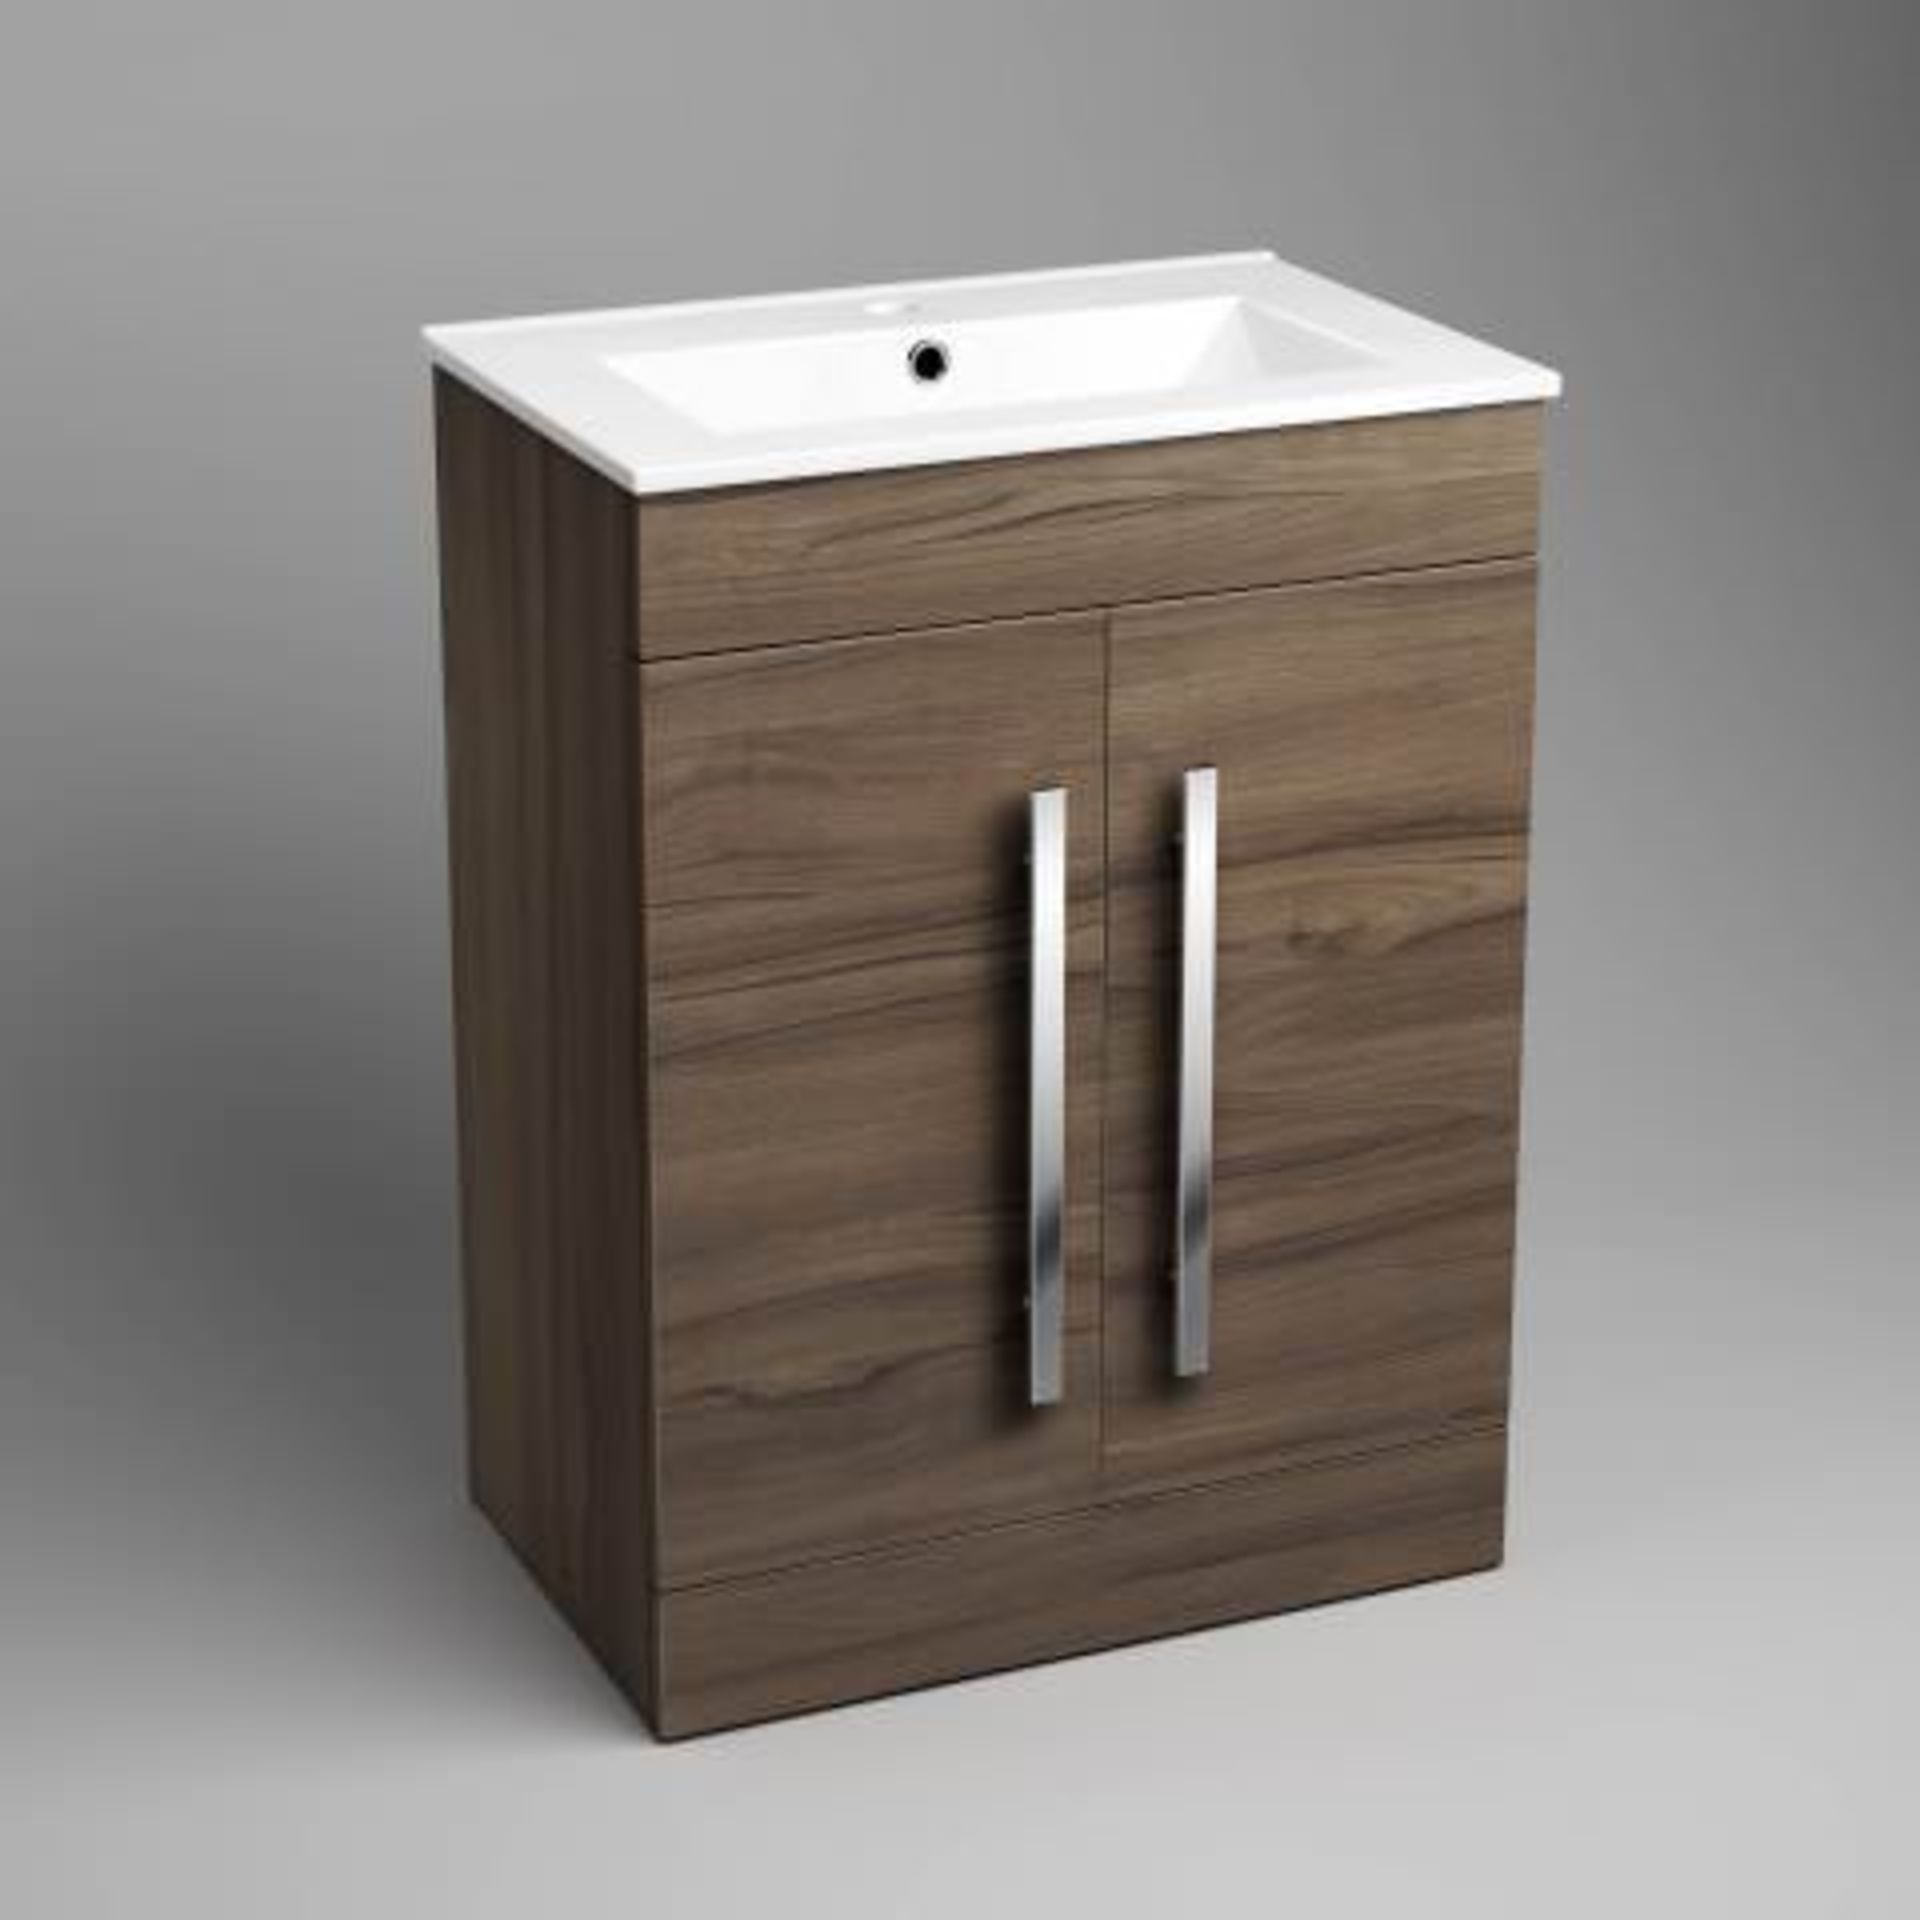 (O19) 600mm Avon Walnut Effect Basin Cabinet - Floor Standing. Complete with basin. Rectangular - Image 3 of 4